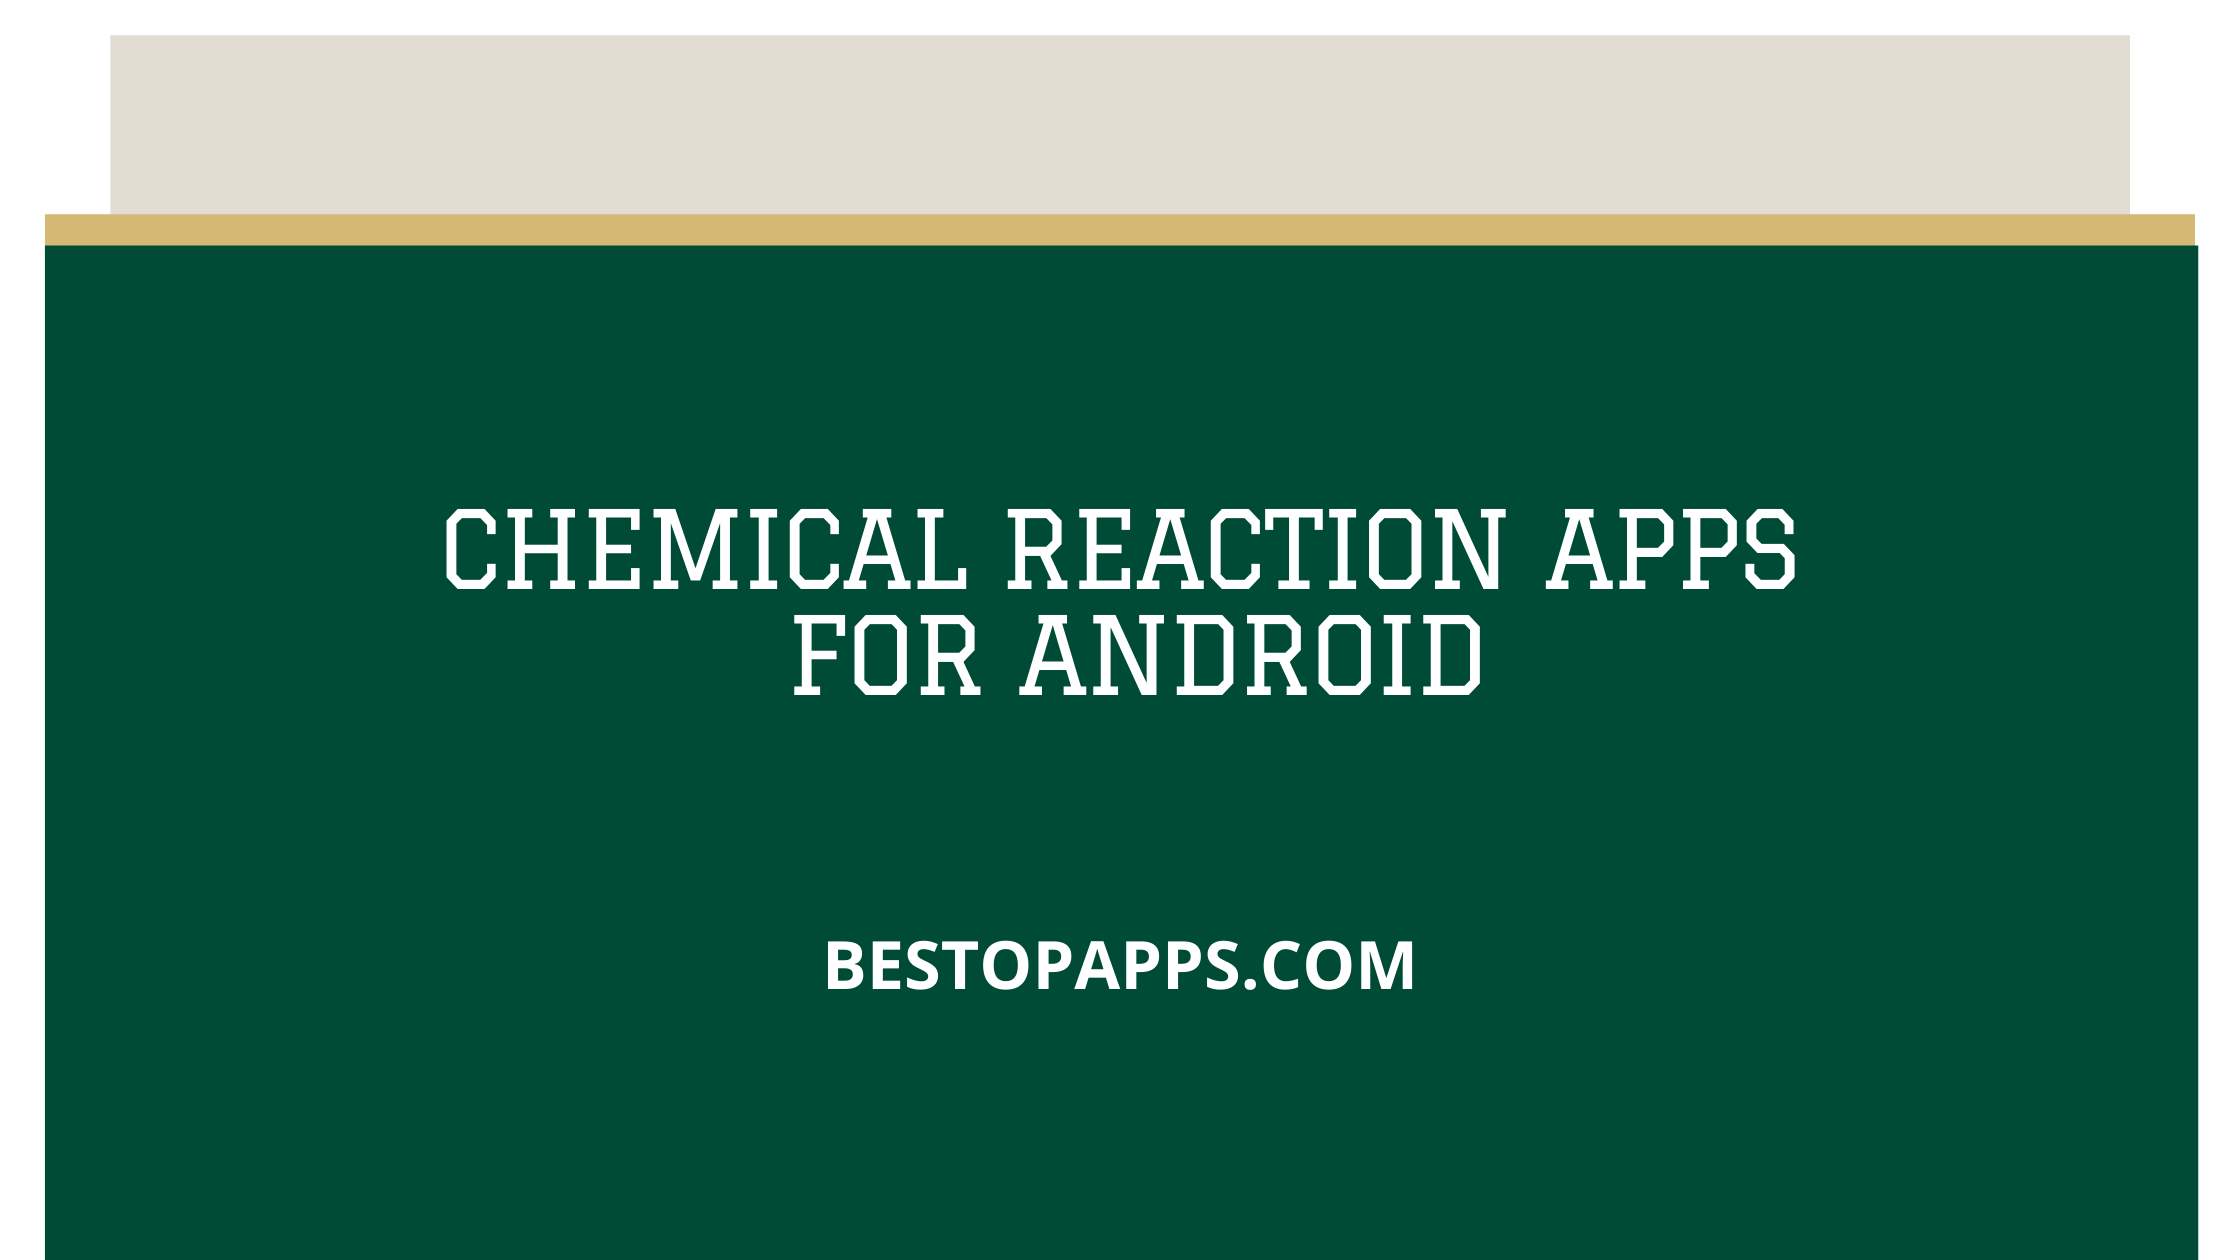 Chemical Reaction Apps for Android